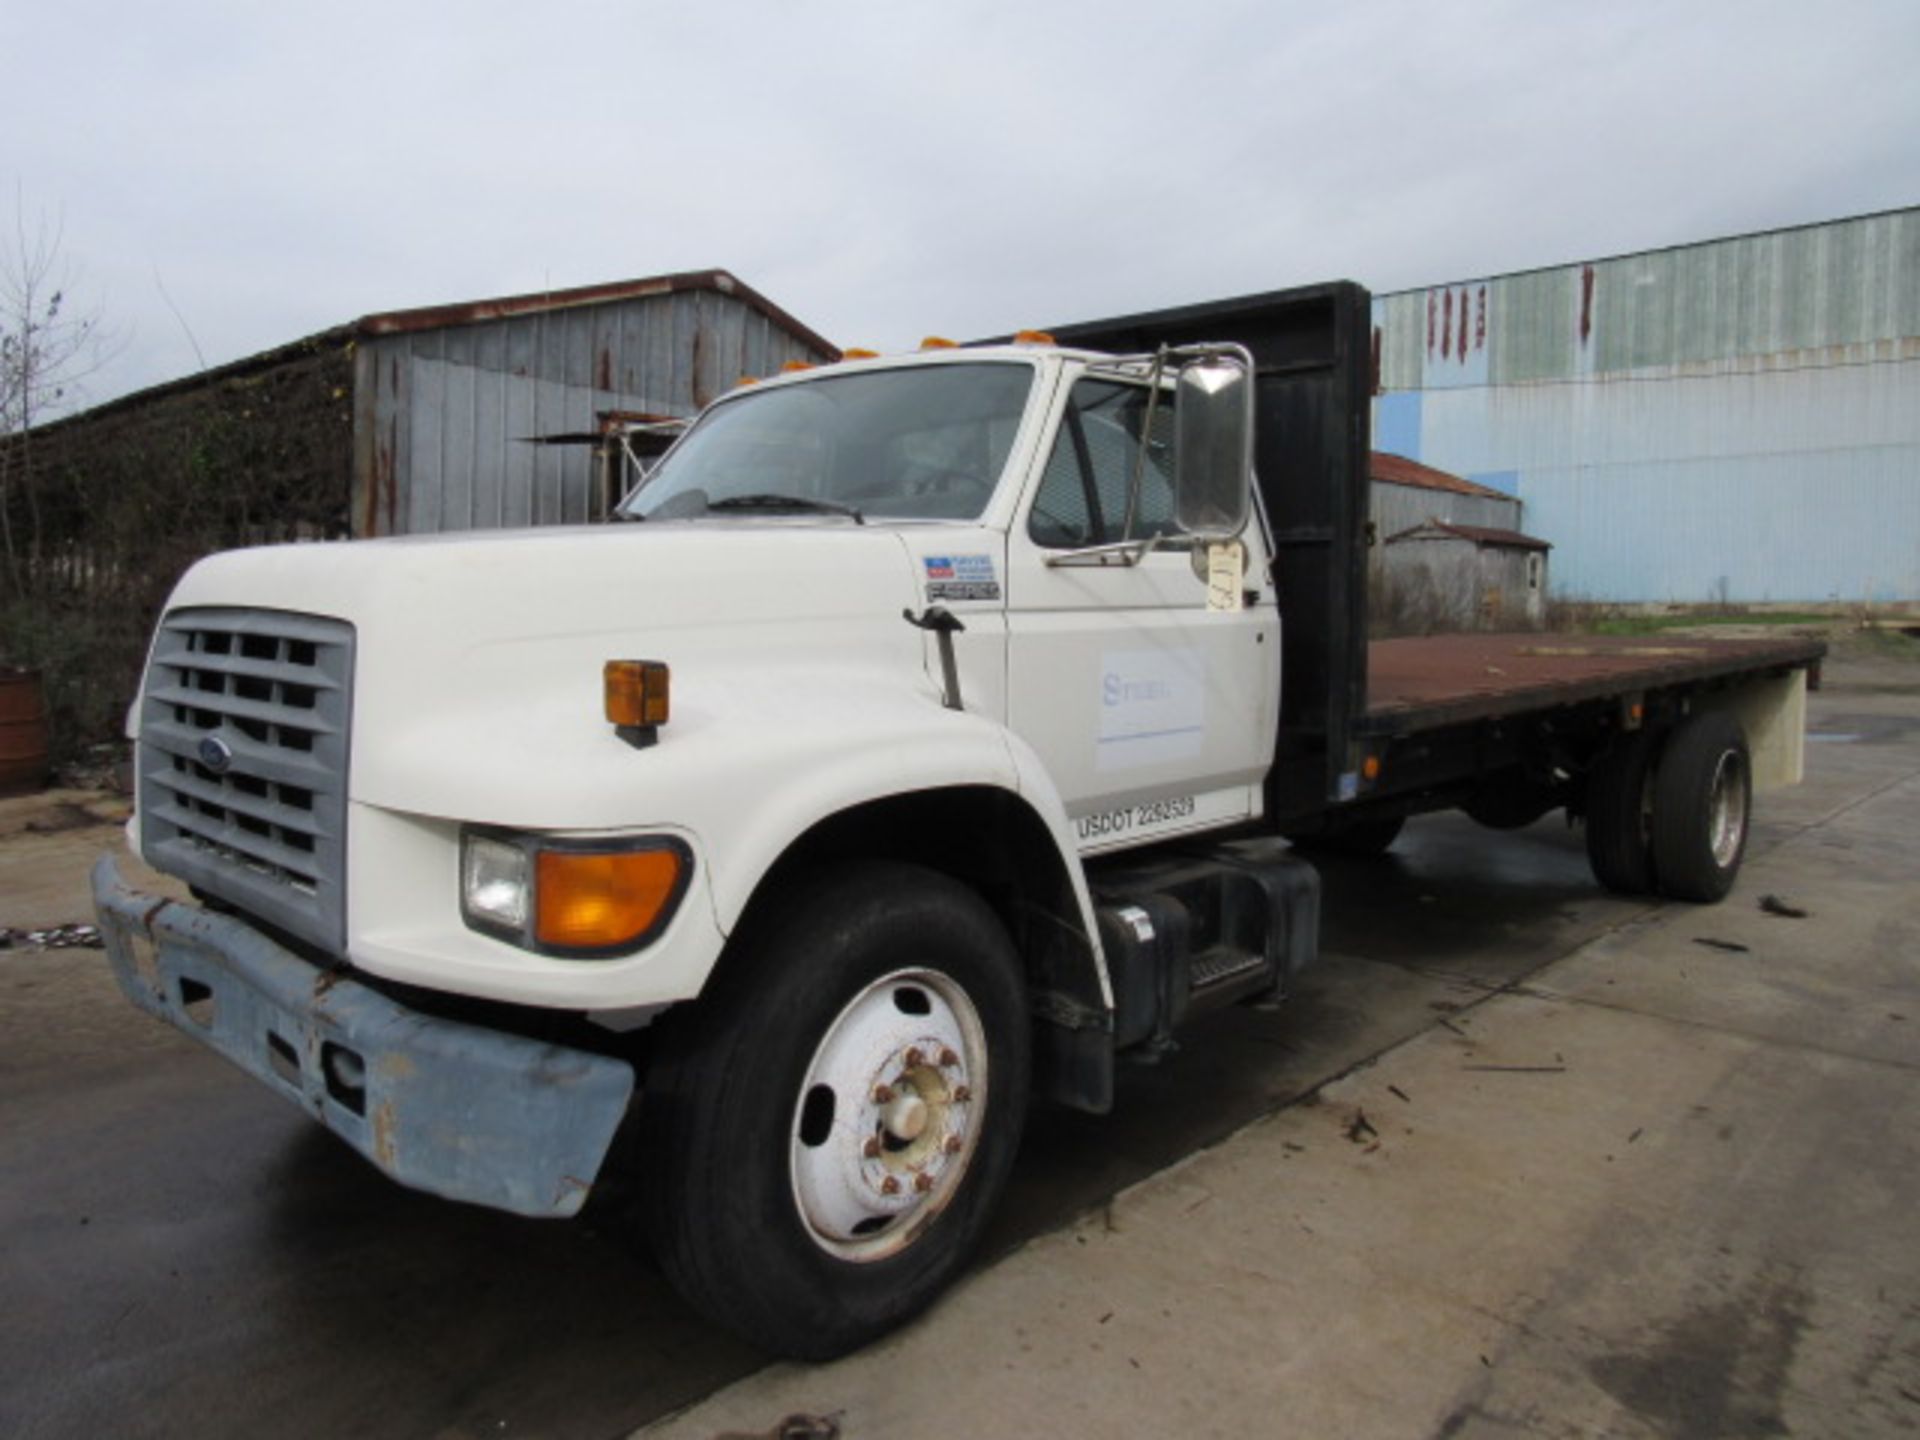 Ford F800 Flatbed Truck - Image 2 of 9